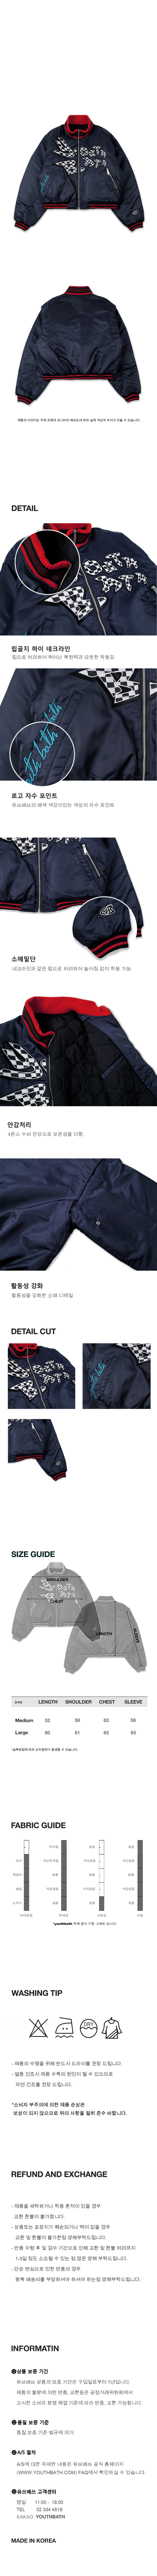 YBCC Two-Way Zip-Up Barcity Jumper_NAVY